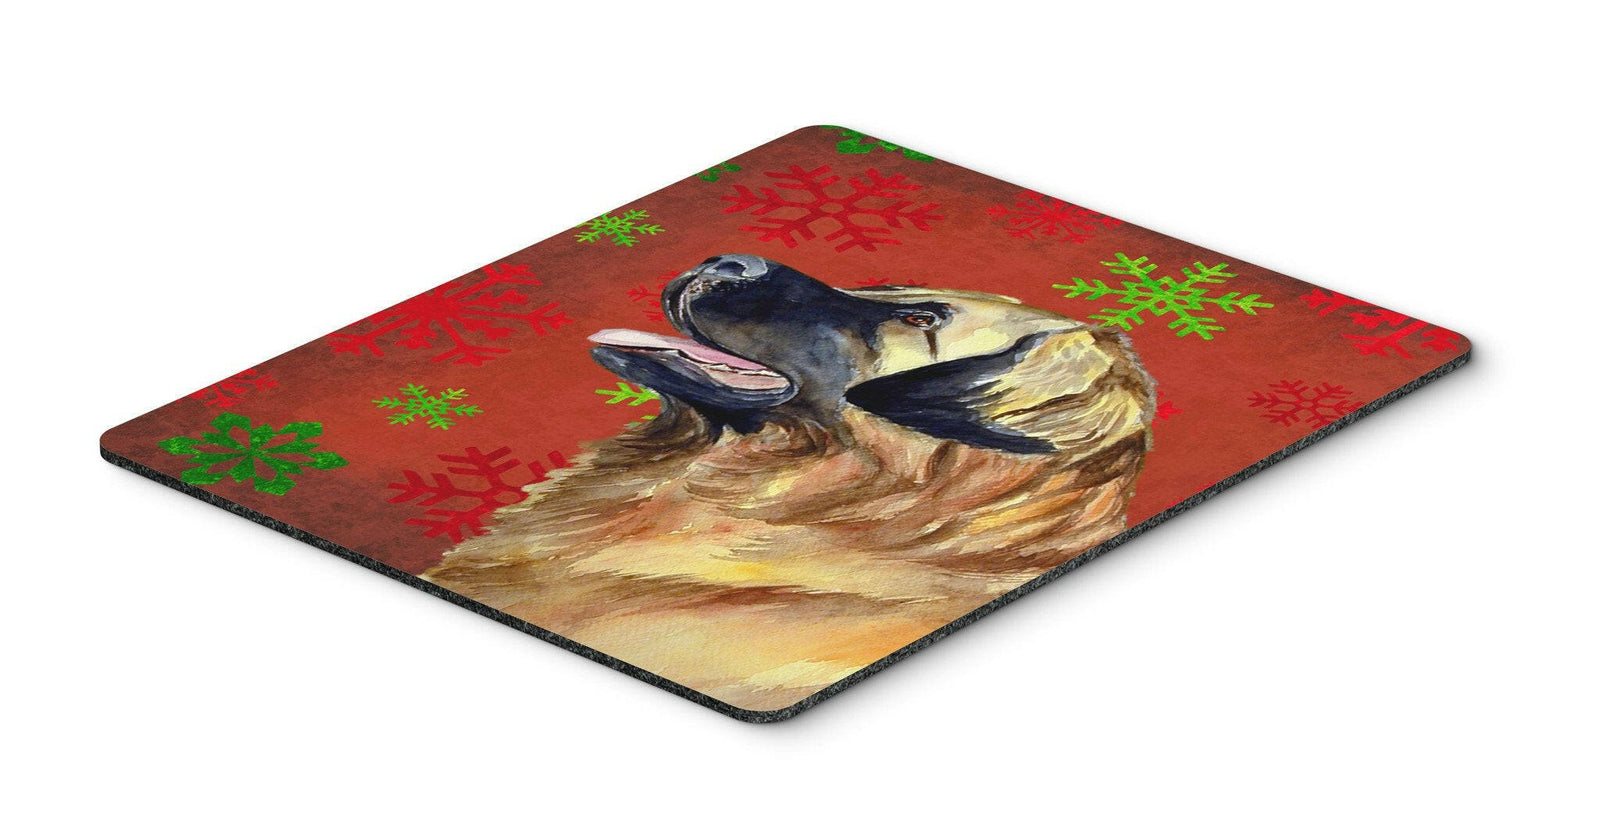 Leonberger Red and Green Snowflakes Christmas Mouse Pad, Hot Pad or Trivet by Caroline's Treasures